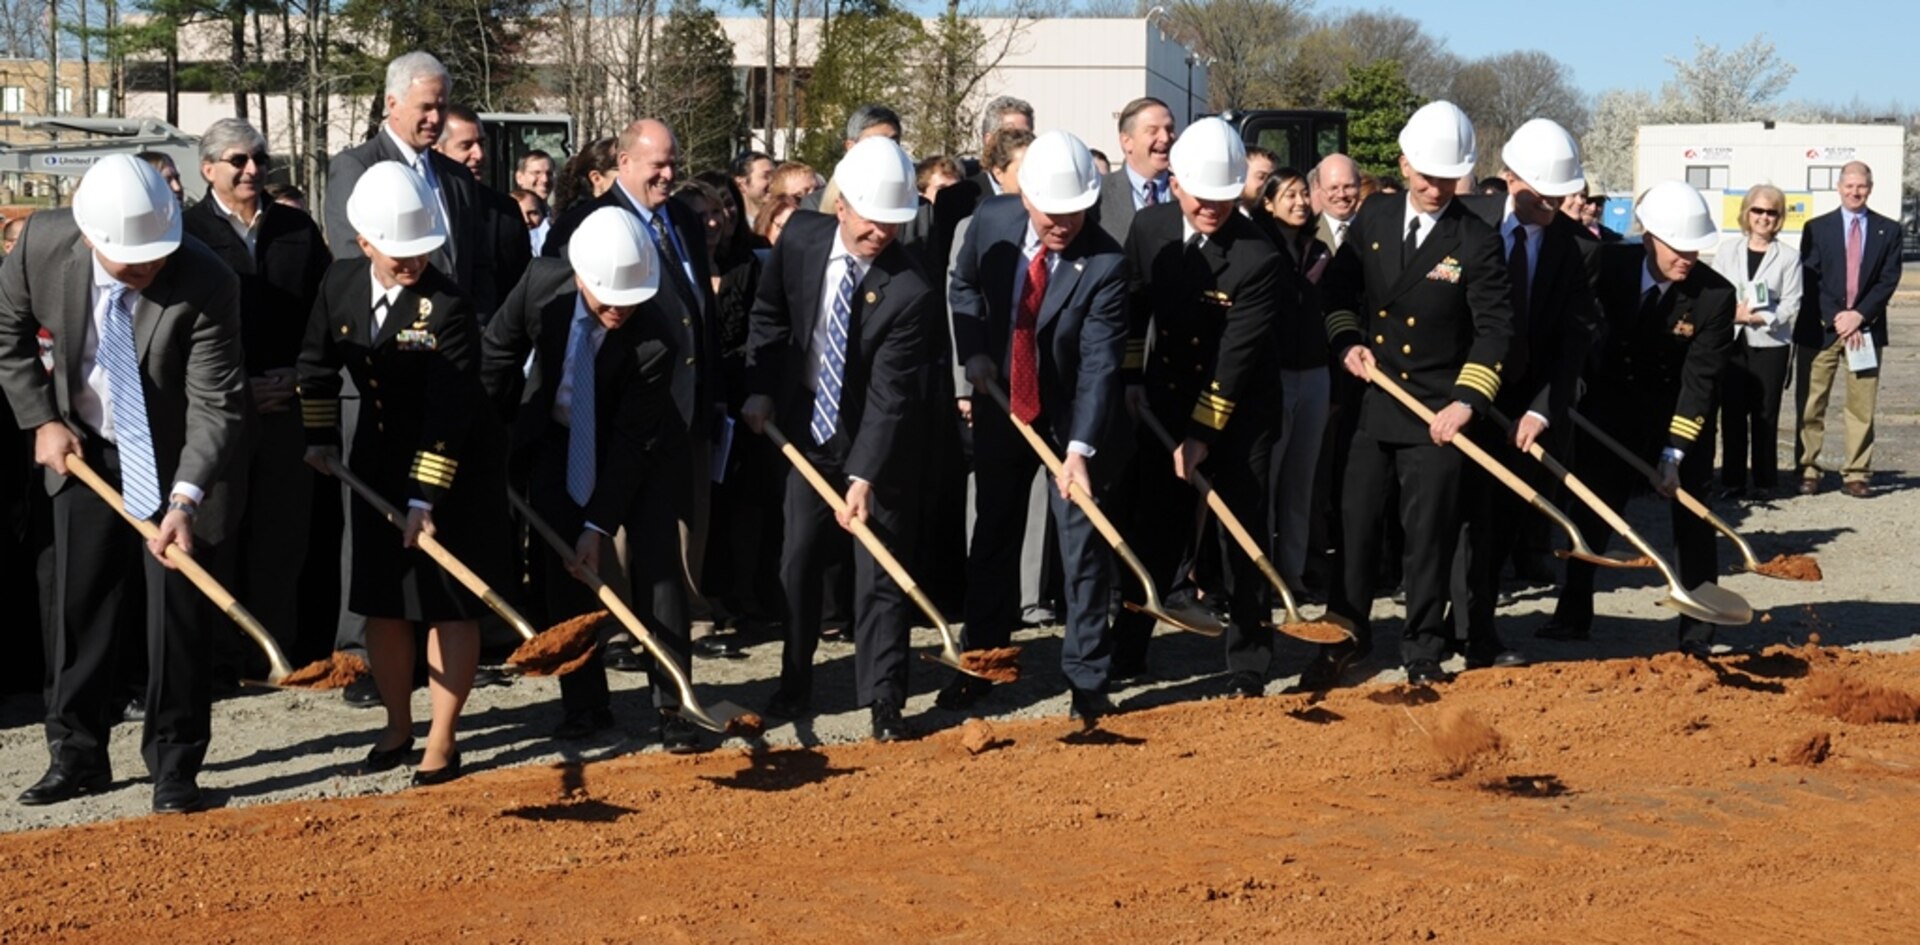 DAHLGREN, Va. - Navy leadership is joined by members of Congress at a groundbreaking ceremony for the new Naval Surface Warfare Center Dahlgren Division (NSWCDD) Missile Support Facility, March 18. The facility will feature state-of-the-art labs, offices, and equipment for more than 300 NSWCDD Strategic and Computing Systems Department scientists, engineers, and technical experts who develop, test, and maintain the Submarine Launched Ballistic Missile (SLBM) fire control and mission planning software. From left to right: Brad Hunley, construction executive for Mortenson Construction; Capt. Mary Feinberg, commanding officer for Naval Support Activity South Potomac; Dennis McLaughlin, NSWCDD technical director; Rep. Rob Wittman, R-Va.; Sen. Tim Kaine, D-Va.; Vice Adm. Terry Benedict, director of Navy Strategic Systems Programs; Capt. Brian Durant, NSWCDD commanding officer; John Fincannon, Senior Executive Service, Strategic Systems Programs; Cmdr. William Windus, Naval Facilities Engineering Command Public Works Officer.